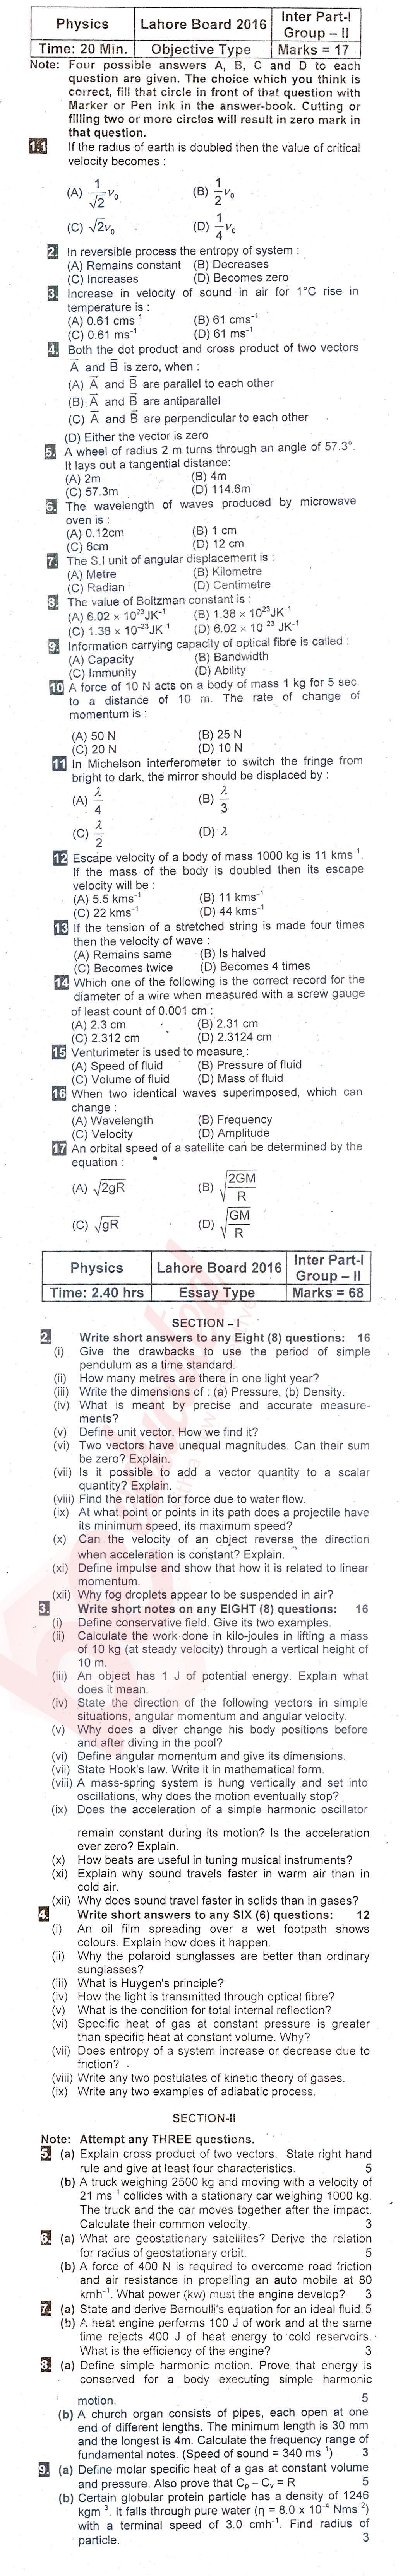 Physics 11th class Past Paper Group 2 BISE Lahore 2016